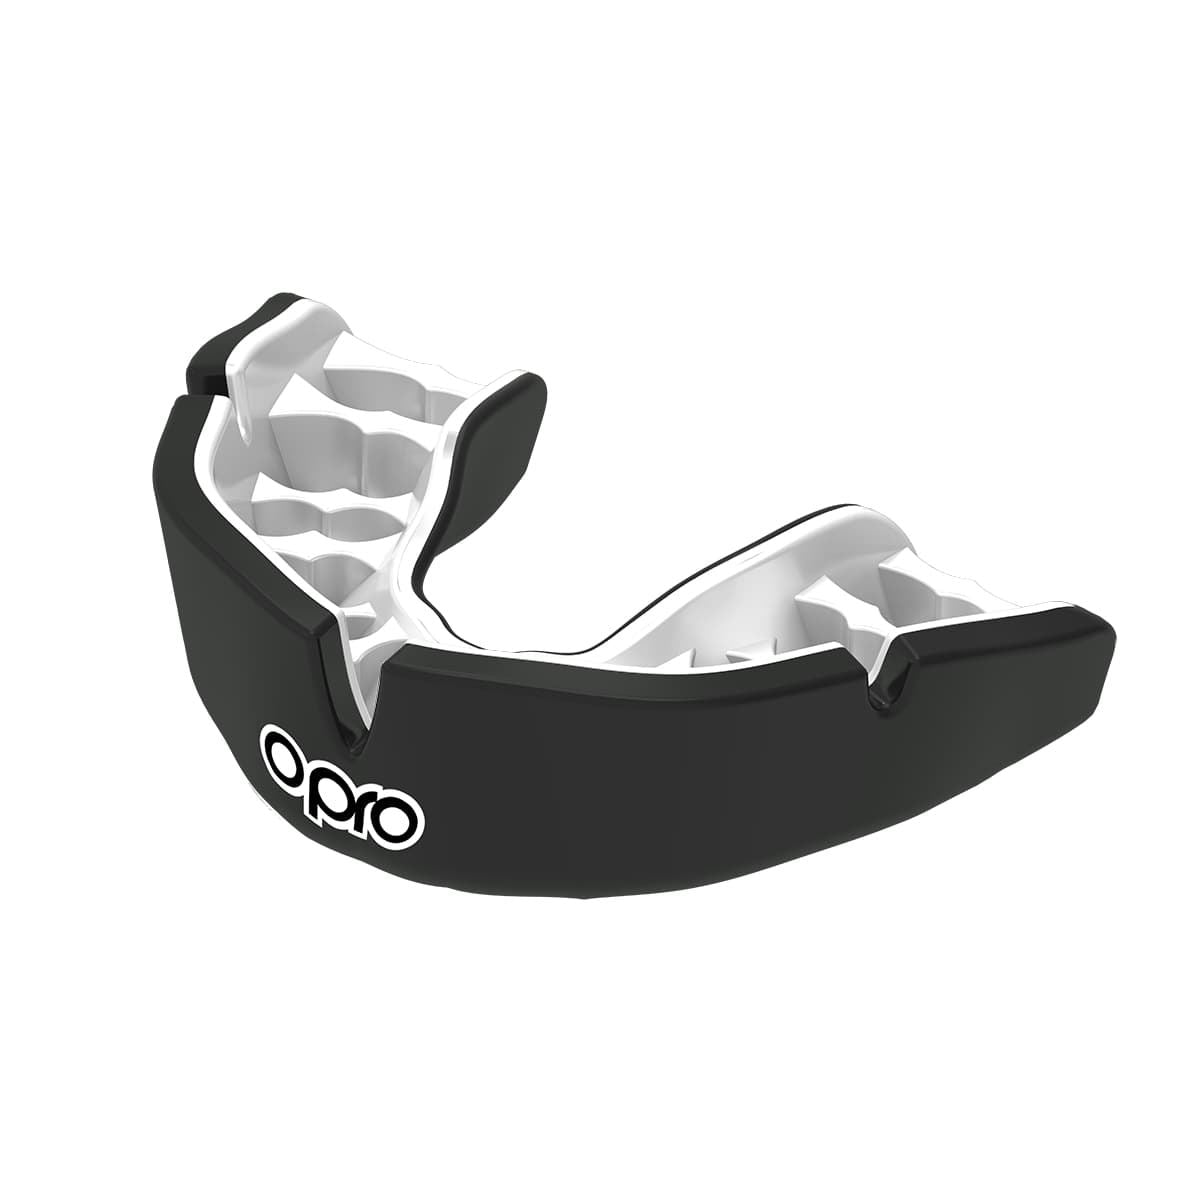 Men's Rugby Protective Mouthguard Opro Instant Custom Fit Adult 2022 Black/White